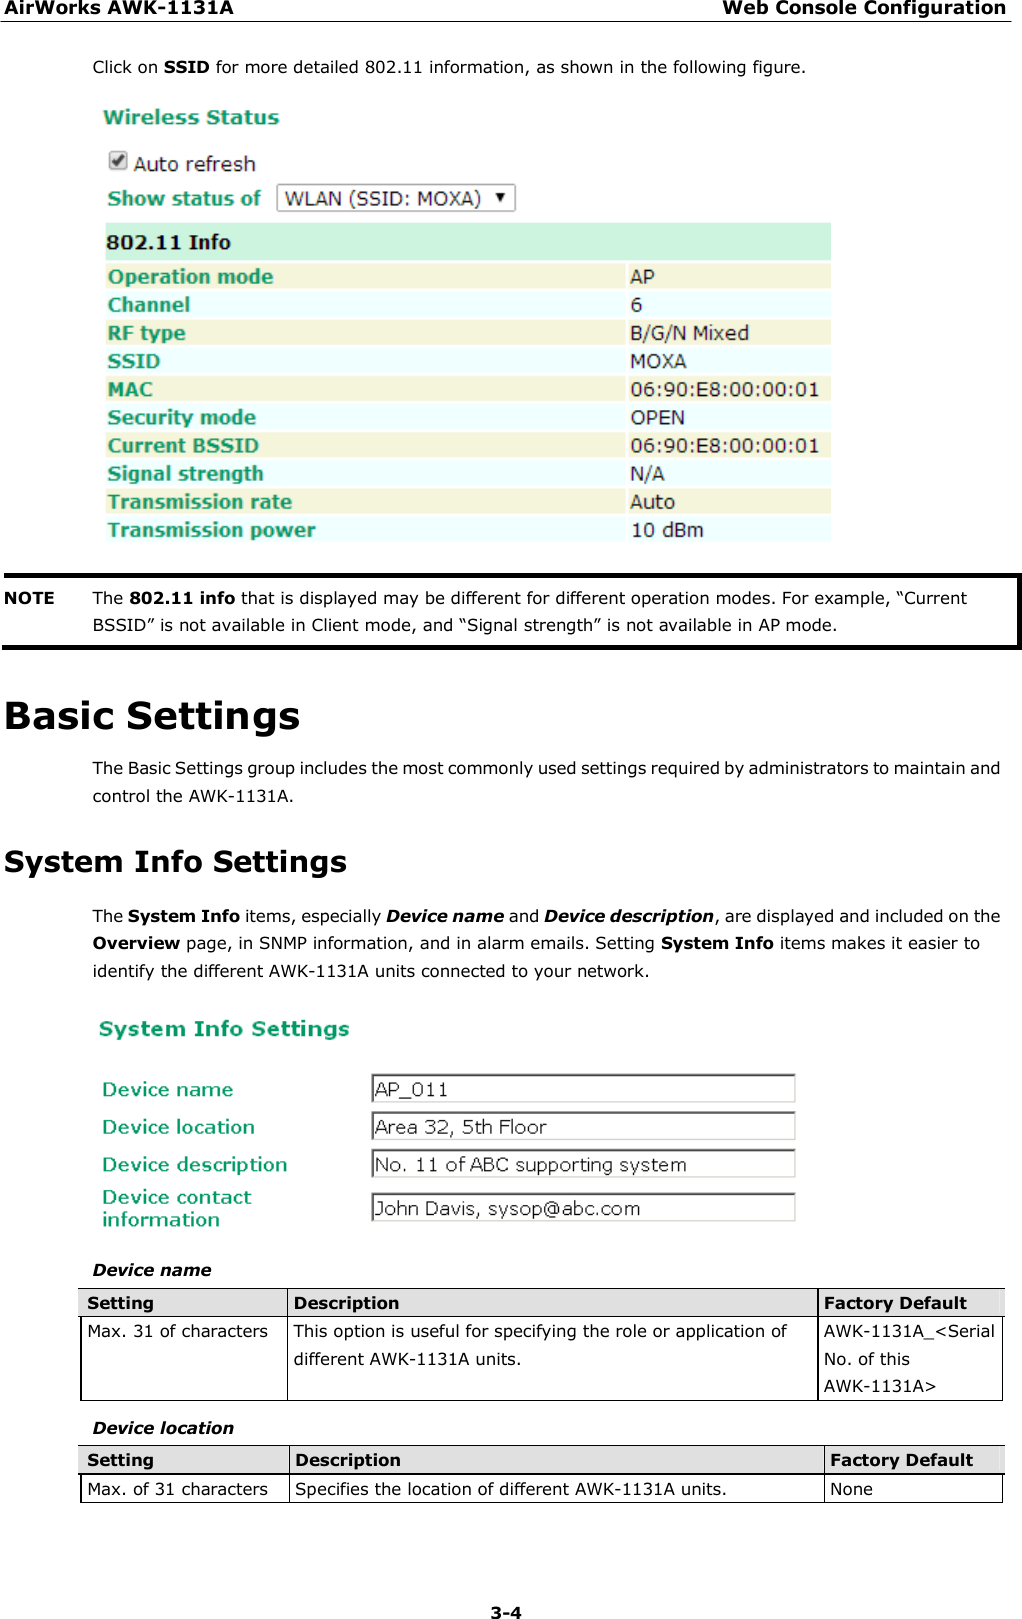 AirWorks AWK-1131A Web Console Configuration 3-4    Click on SSID for more detailed 802.11 information, as shown in the following figure.     NOTE  The 802.11 info that is displayed may be different for different operation modes. For example, “Current BSSID” is not available in Client mode, and “Signal strength” is not available in AP mode.   Basic Settings  The Basic Settings group includes the most commonly used settings required by administrators to maintain and control the AWK-1131A.  System Info Settings  The System Info items, especially Device name and Device description, are displayed and included on the Overview page, in SNMP information, and in alarm emails. Setting System Info items makes it easier to identify the different AWK-1131A units connected to your network.    Device name  Setting Description Factory Default Max. 31 of characters This option is useful for specifying the role or application of different AWK-1131A units. AWK-1131A_&lt;Serial No. of this AWK-1131A&gt;  Device location  Setting Description Factory Default Max. of 31 characters Specifies the location of different AWK-1131A units. None 